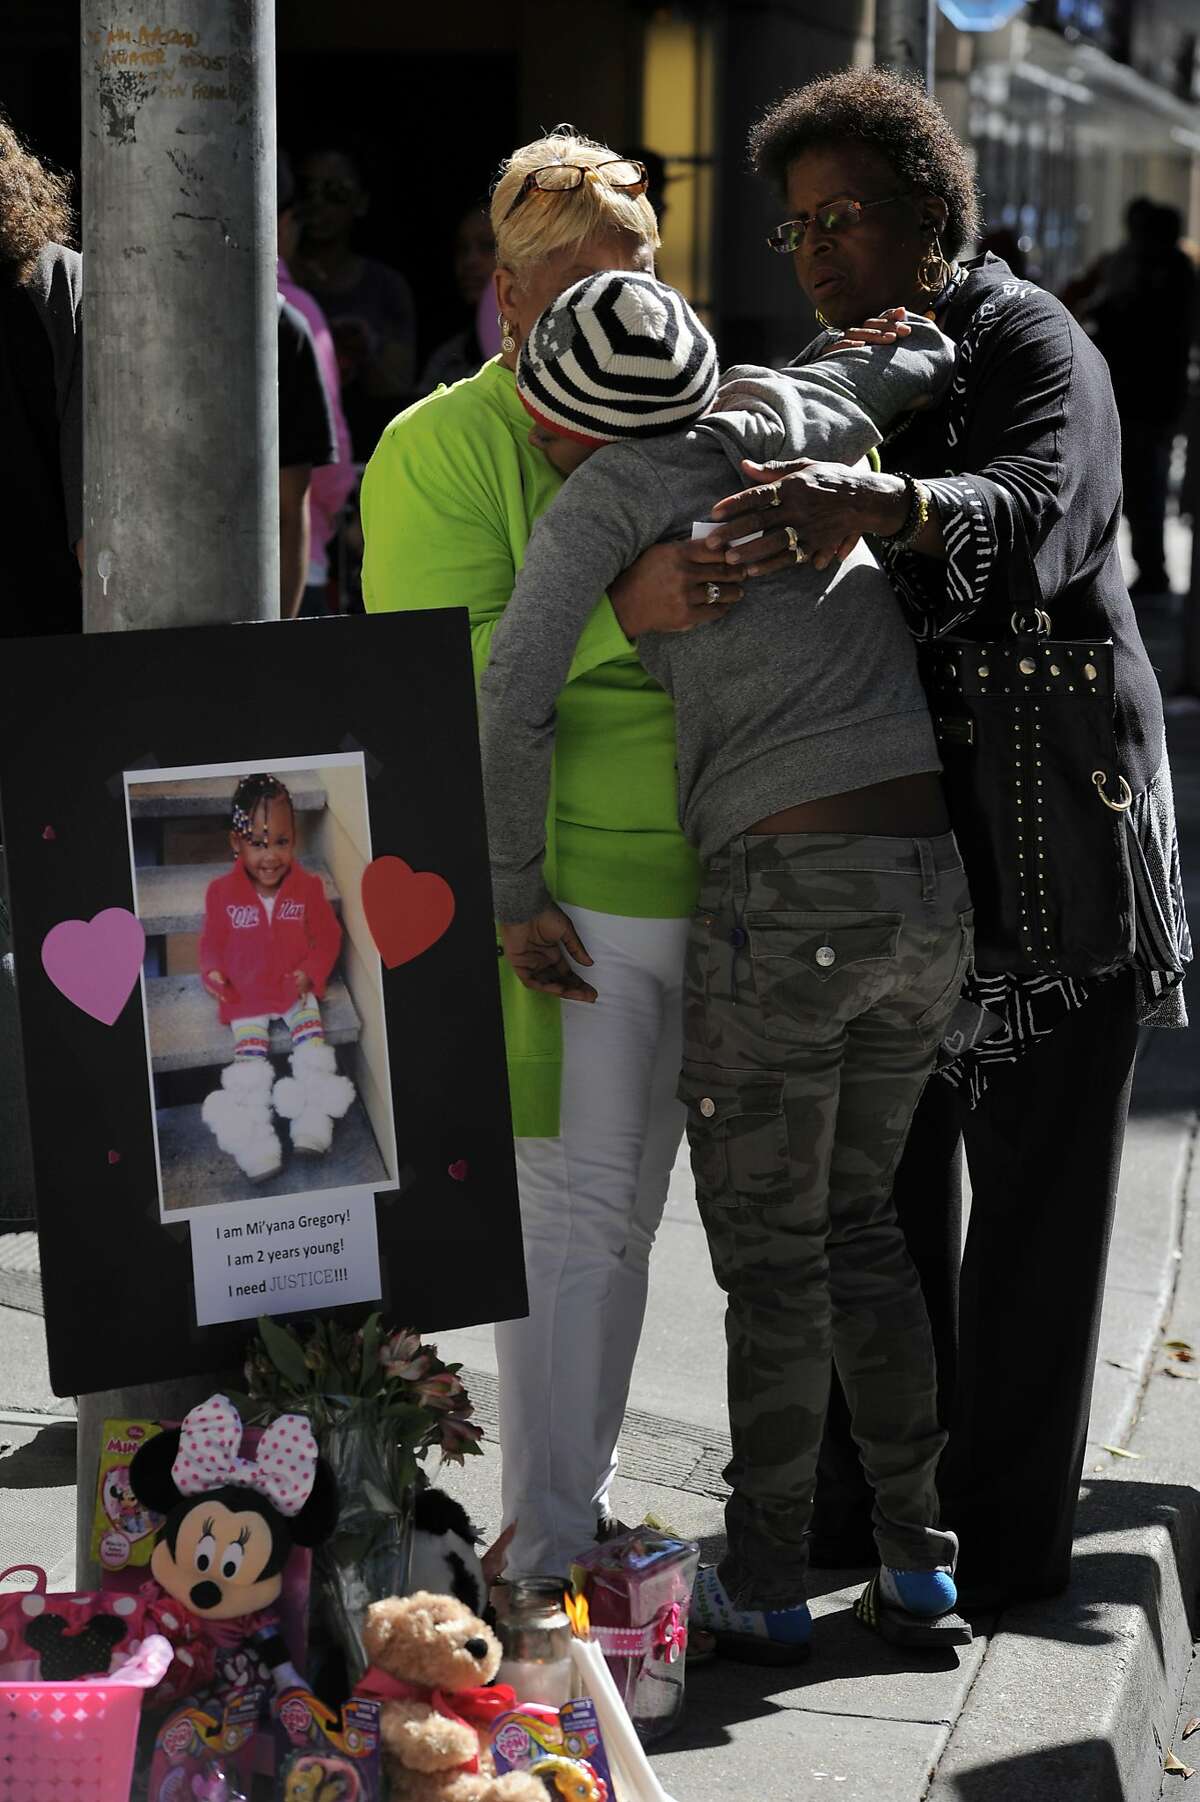 Shonece Rodgers, 20, breaks down and is comforted by her grandmother in-law Cynthia Johnson, left, during a vigil for her daughter Mi-Yana Gregory on August 17, 2014 in San Francisco, CA. Mi-Yana Gregory, 2, was killed by a hit-and-run driver Friday night on Mission Street in downtown. The vigil took place on Mission street at the crosswalk between 4th and 5th where Mi-Yana was struck.